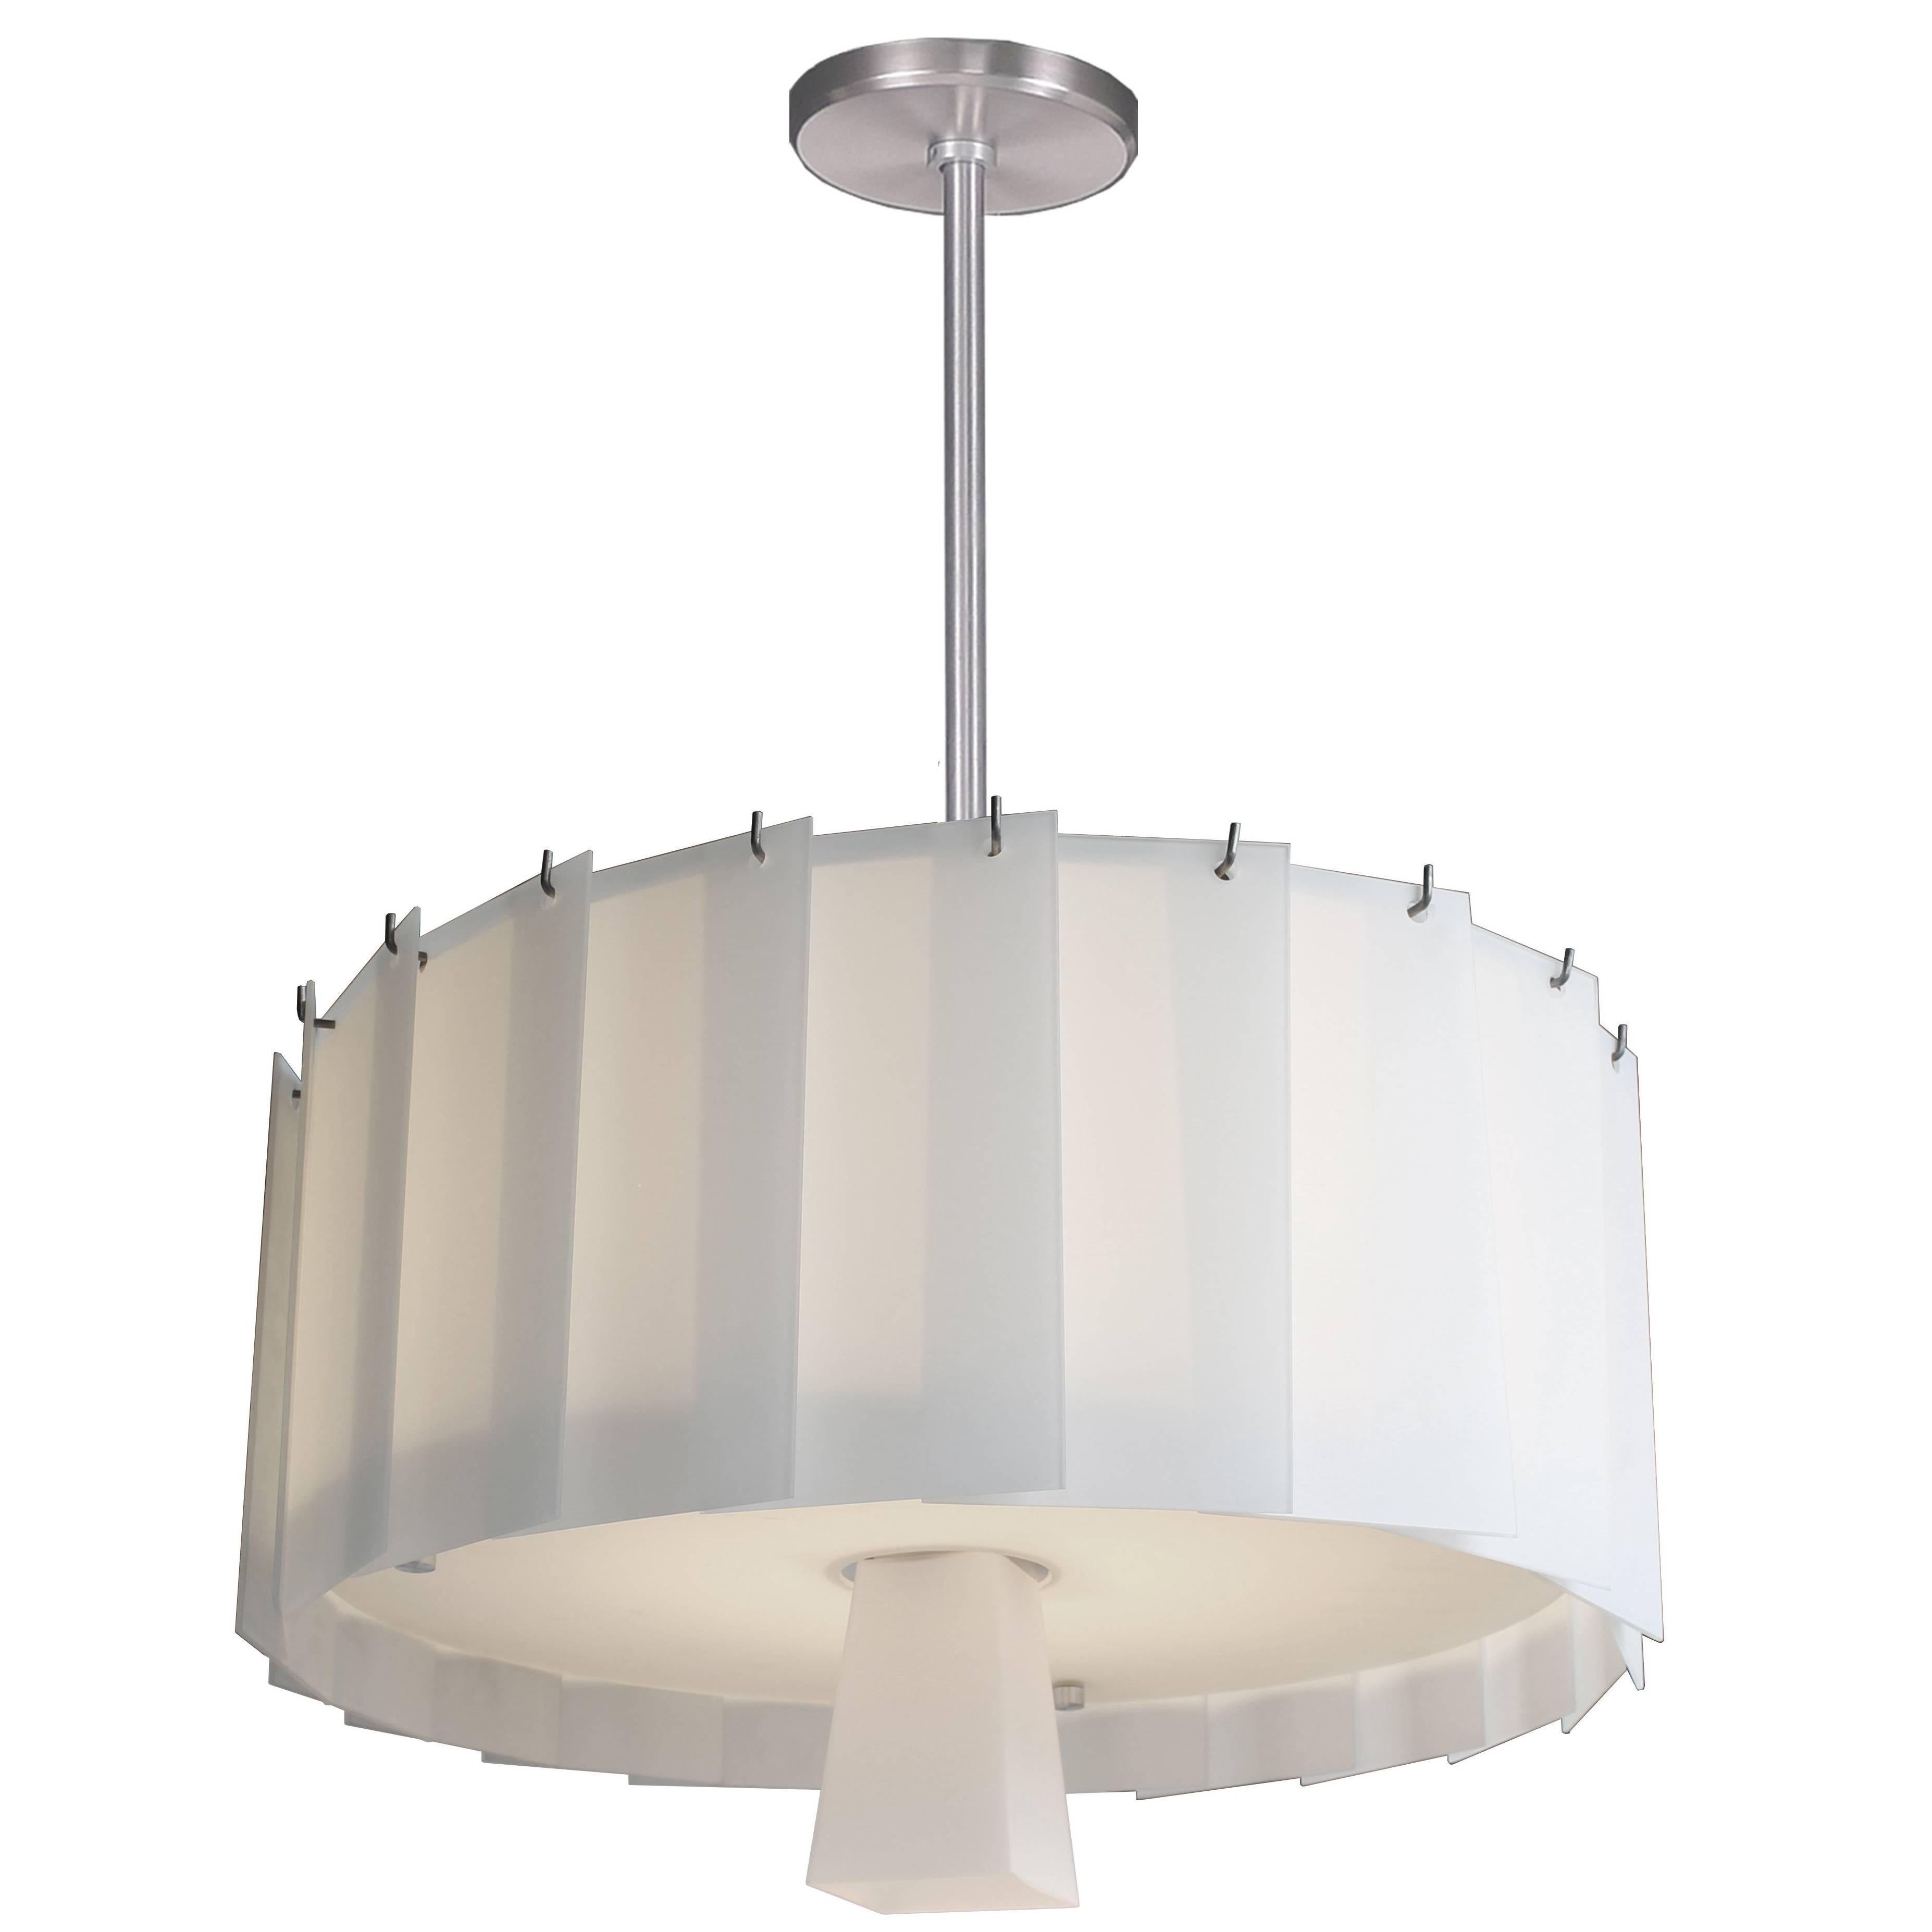 Art Deco Style Circular Chandelier with Overlapping White Glass Panels For Sale